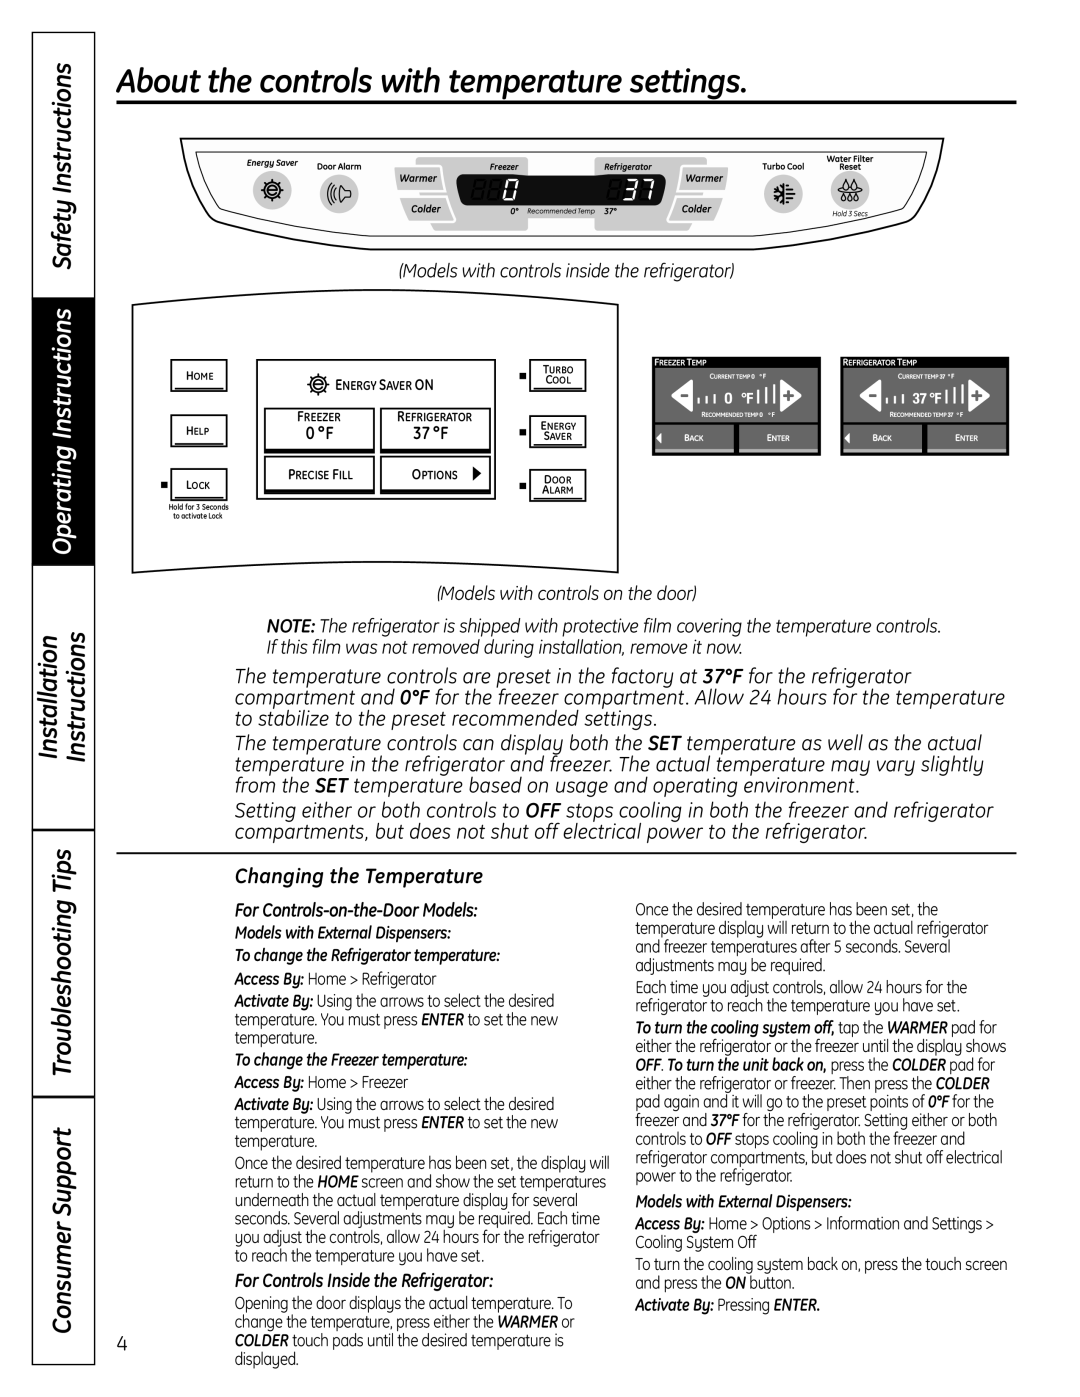 GE 225D1804P001 About the controls with temperature settings, Safety Instructions, Tips, Operating Instructions 